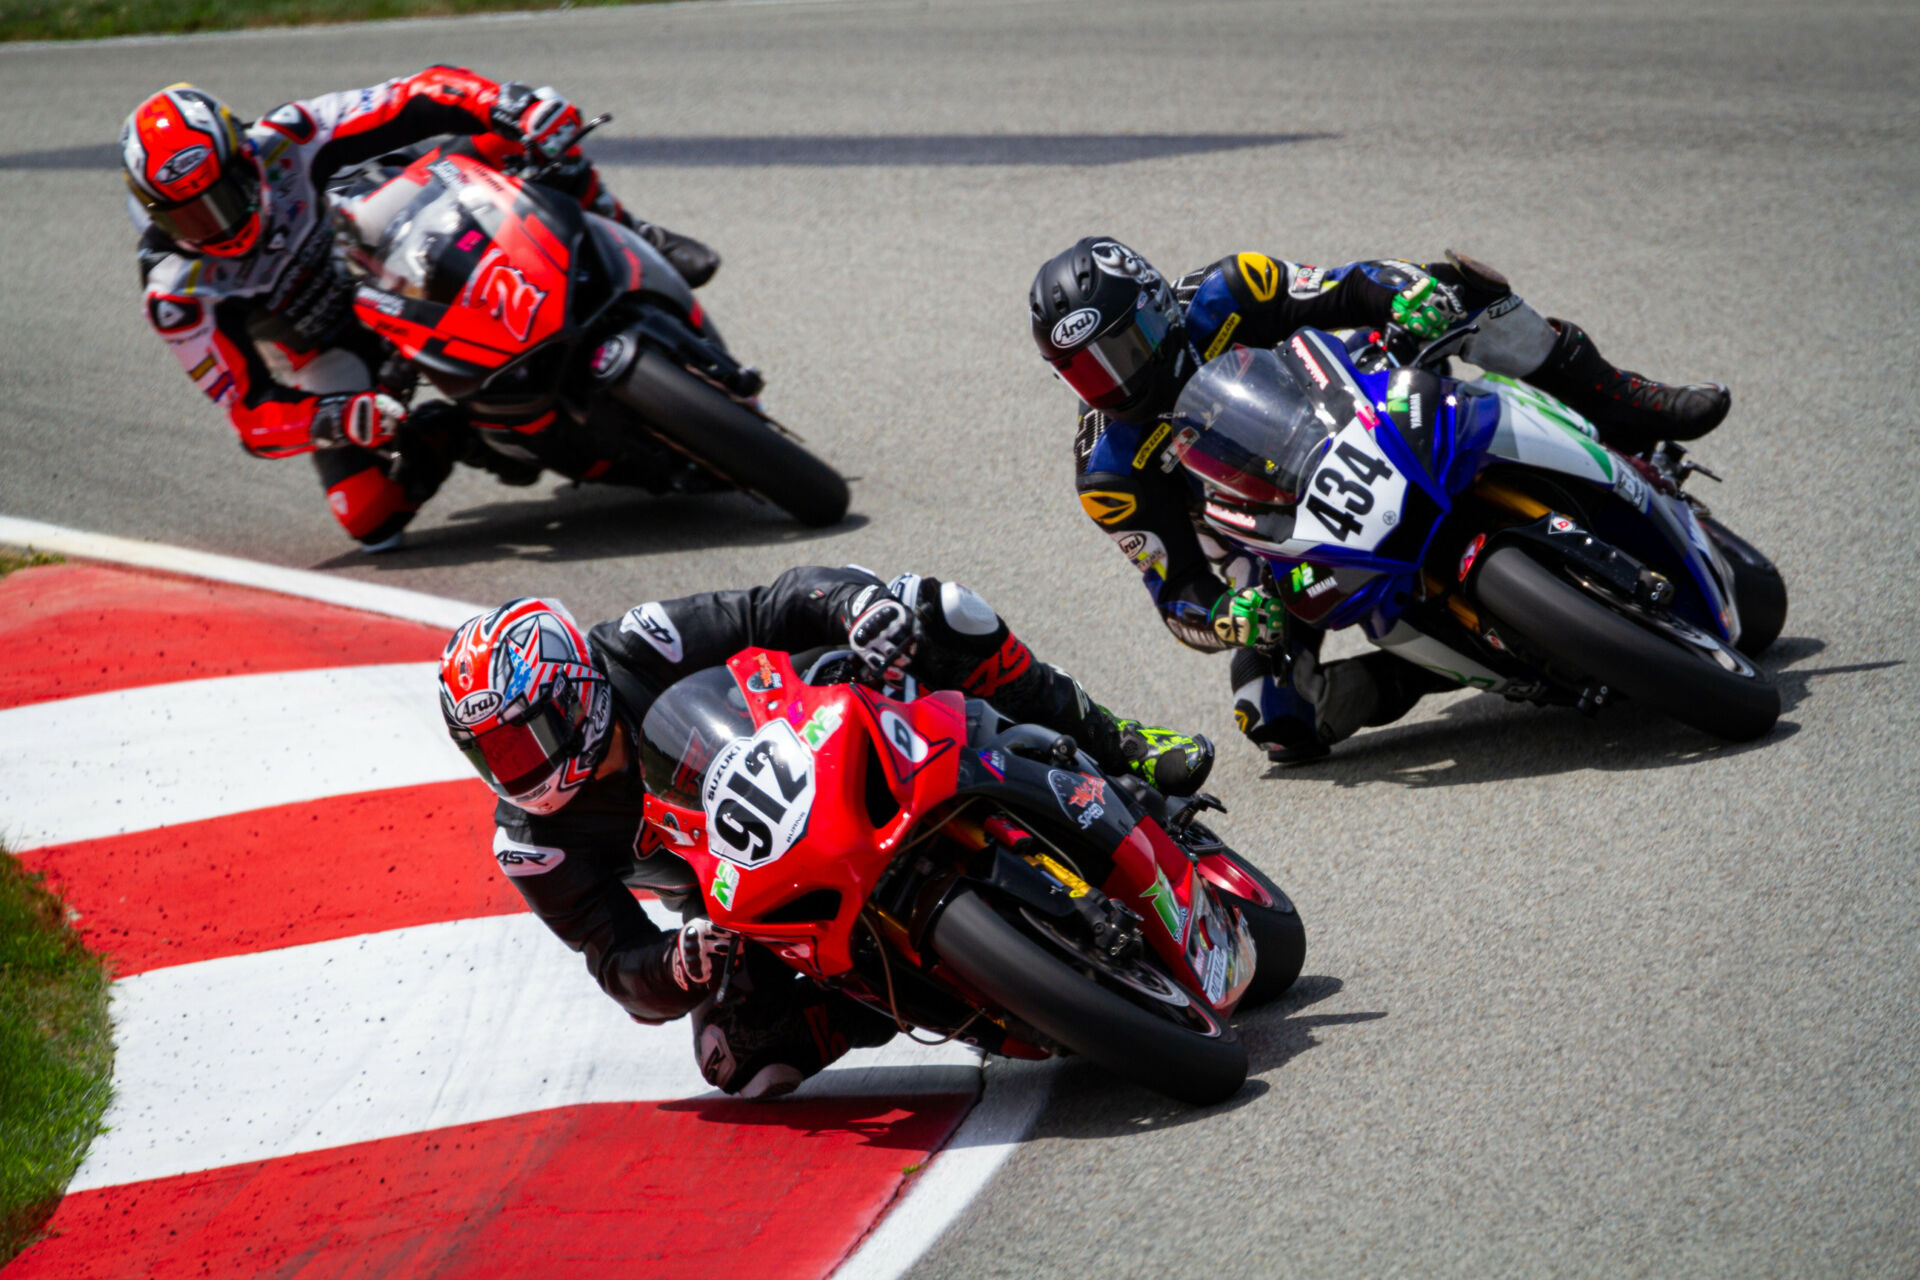 The N2/WERA National Endurance Series by Dunlop is offering cash prizes in every class. Photo by 4theriders.com, courtesy N2 Racing.